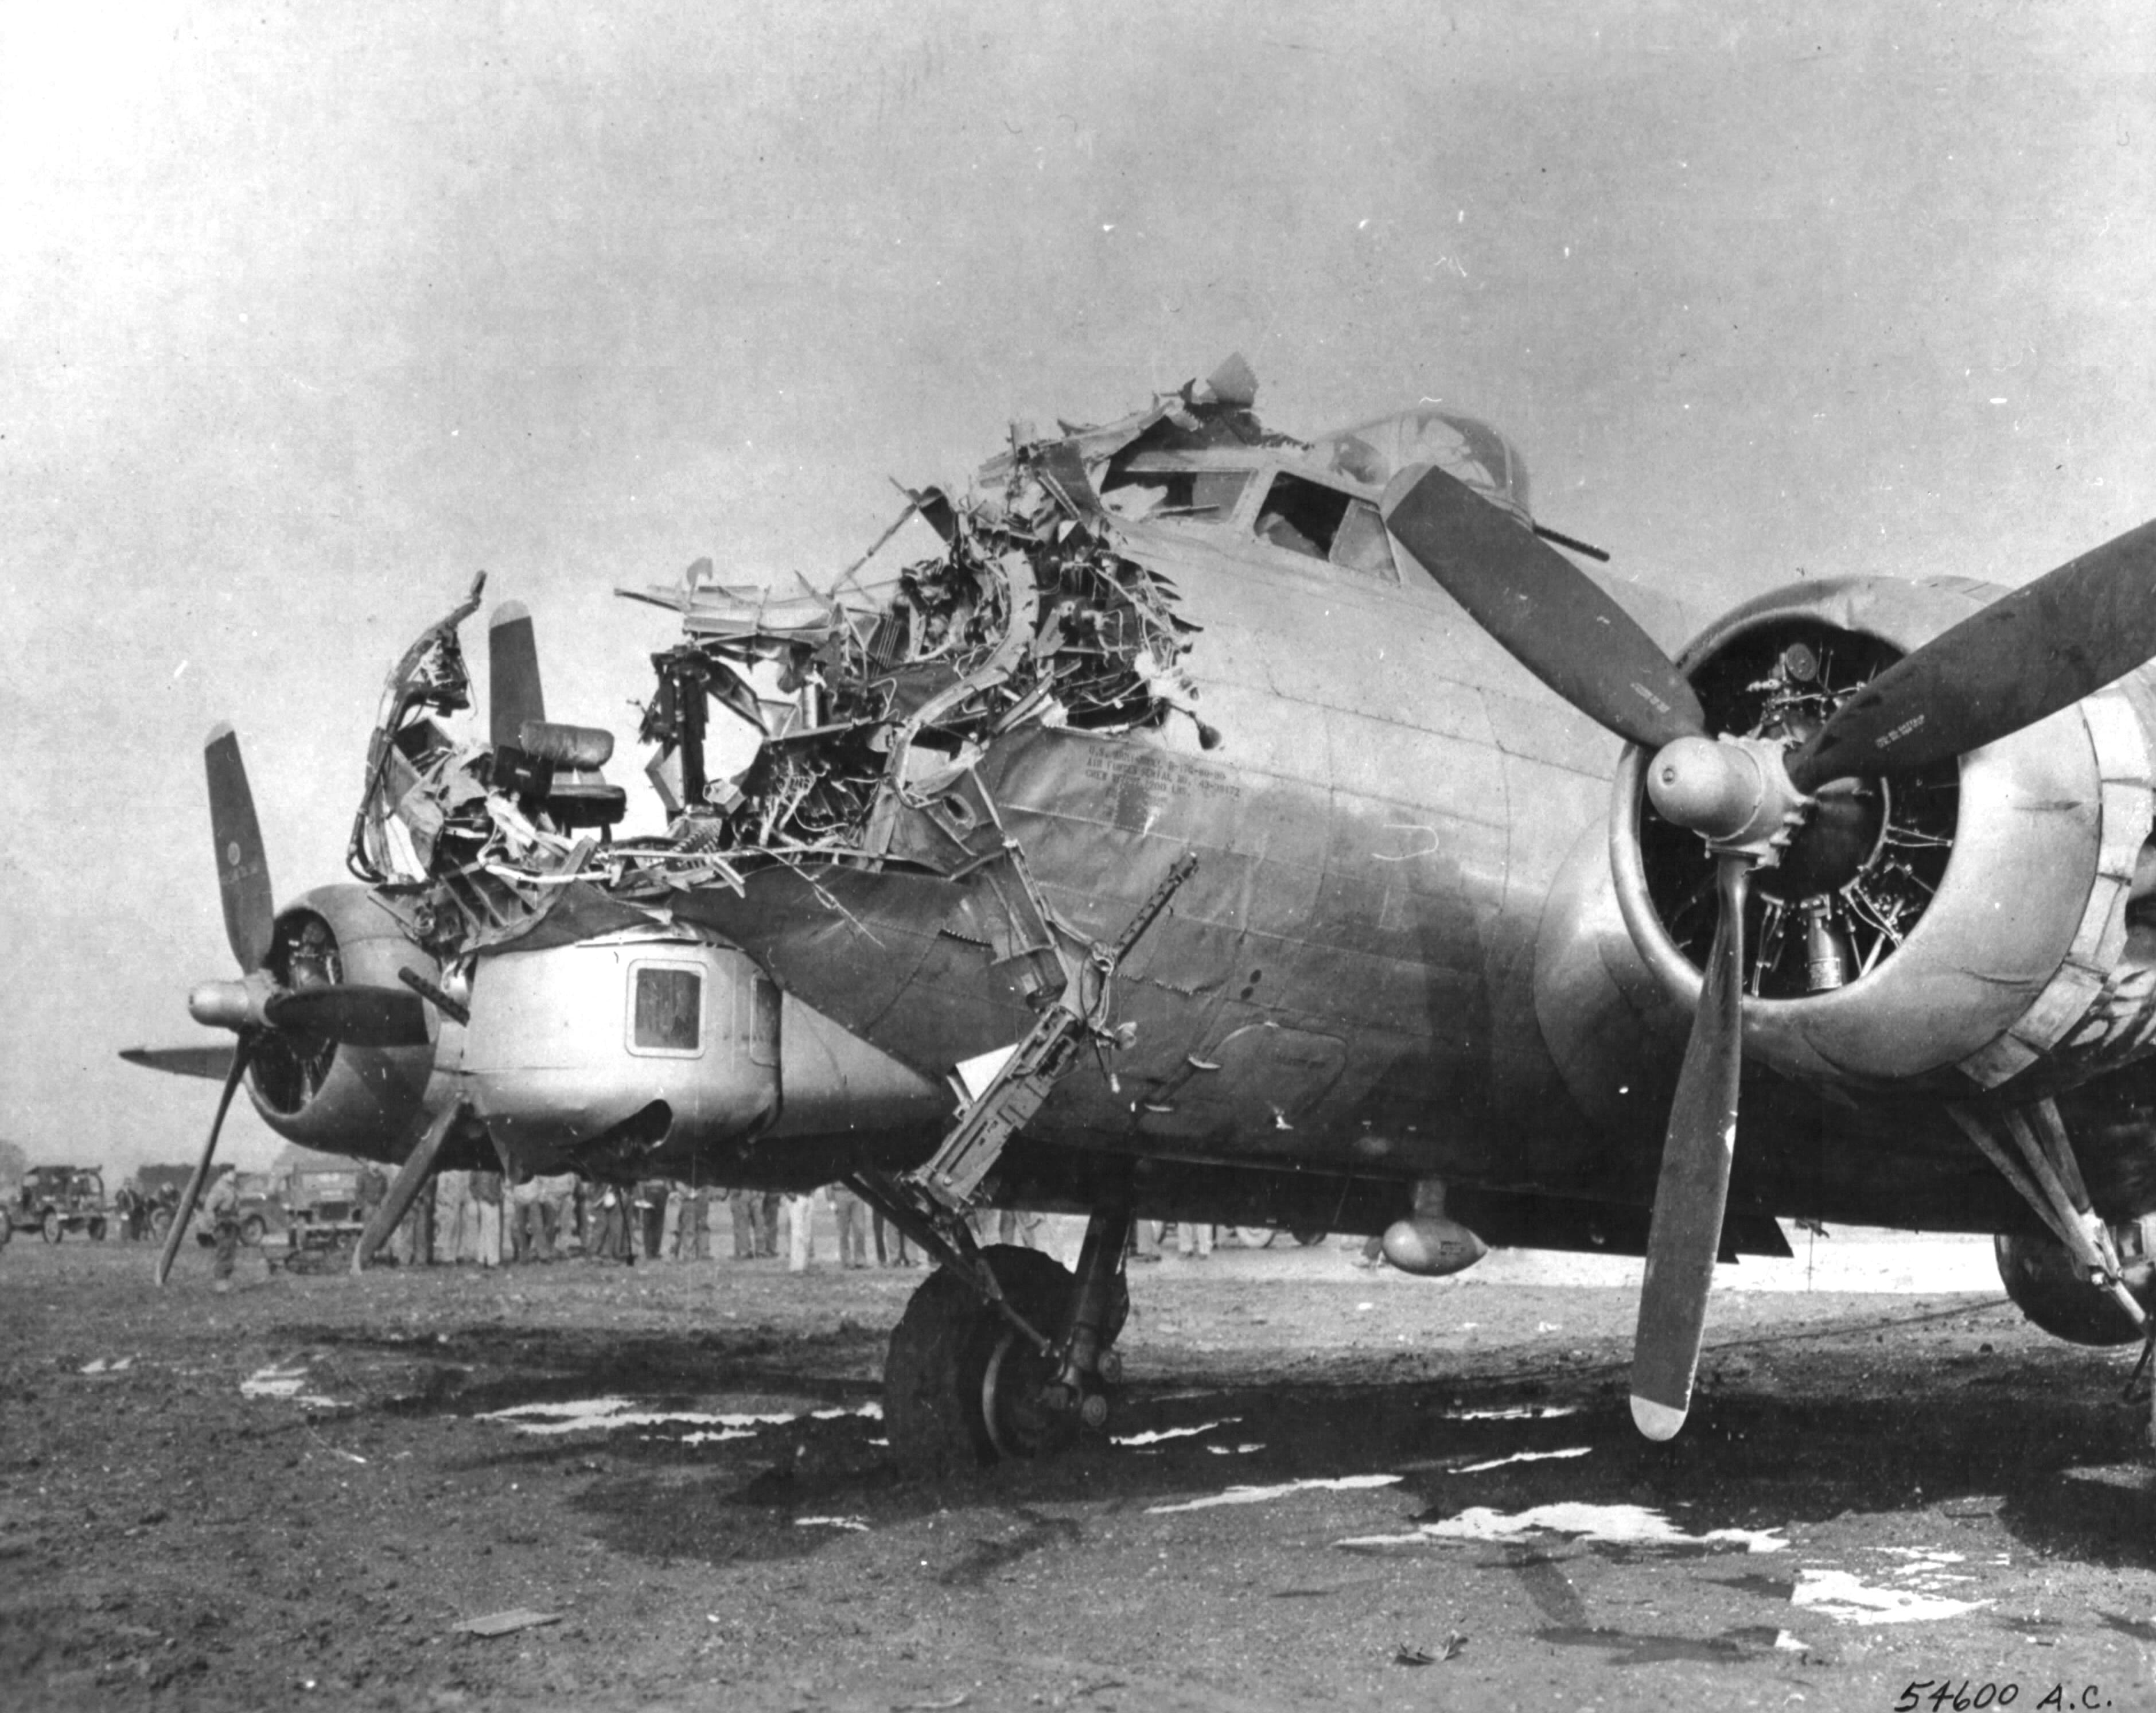 B-17G bomber returned to Nuthampstead, Hertfordshire, England, United Kingdom after being damaged on bombing mission over Cologne, Germany, 5 Oct 1944